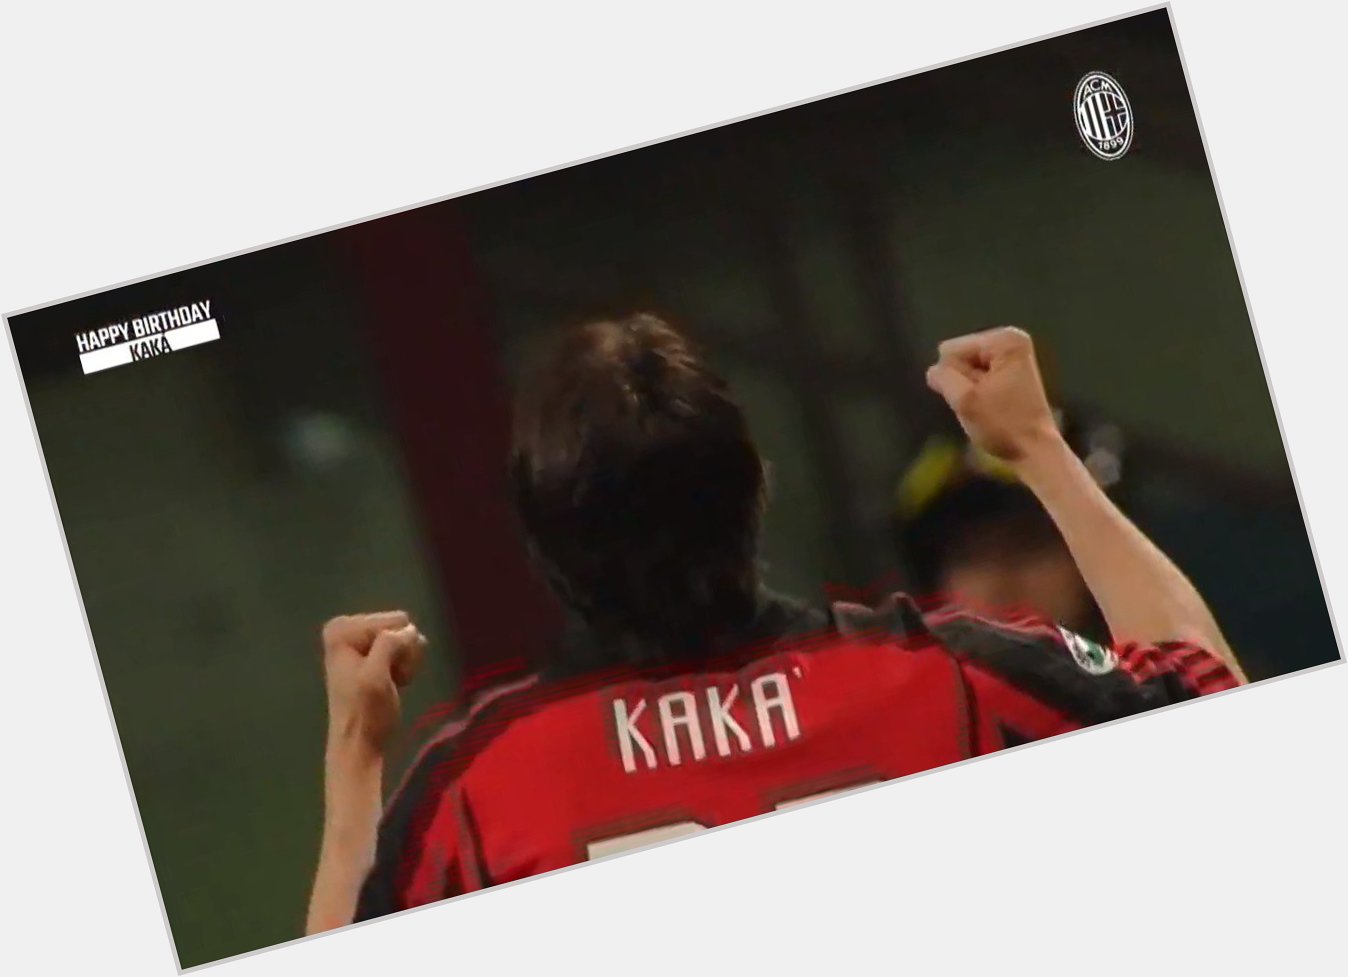 Happy birthday to Kaka. What a player! 